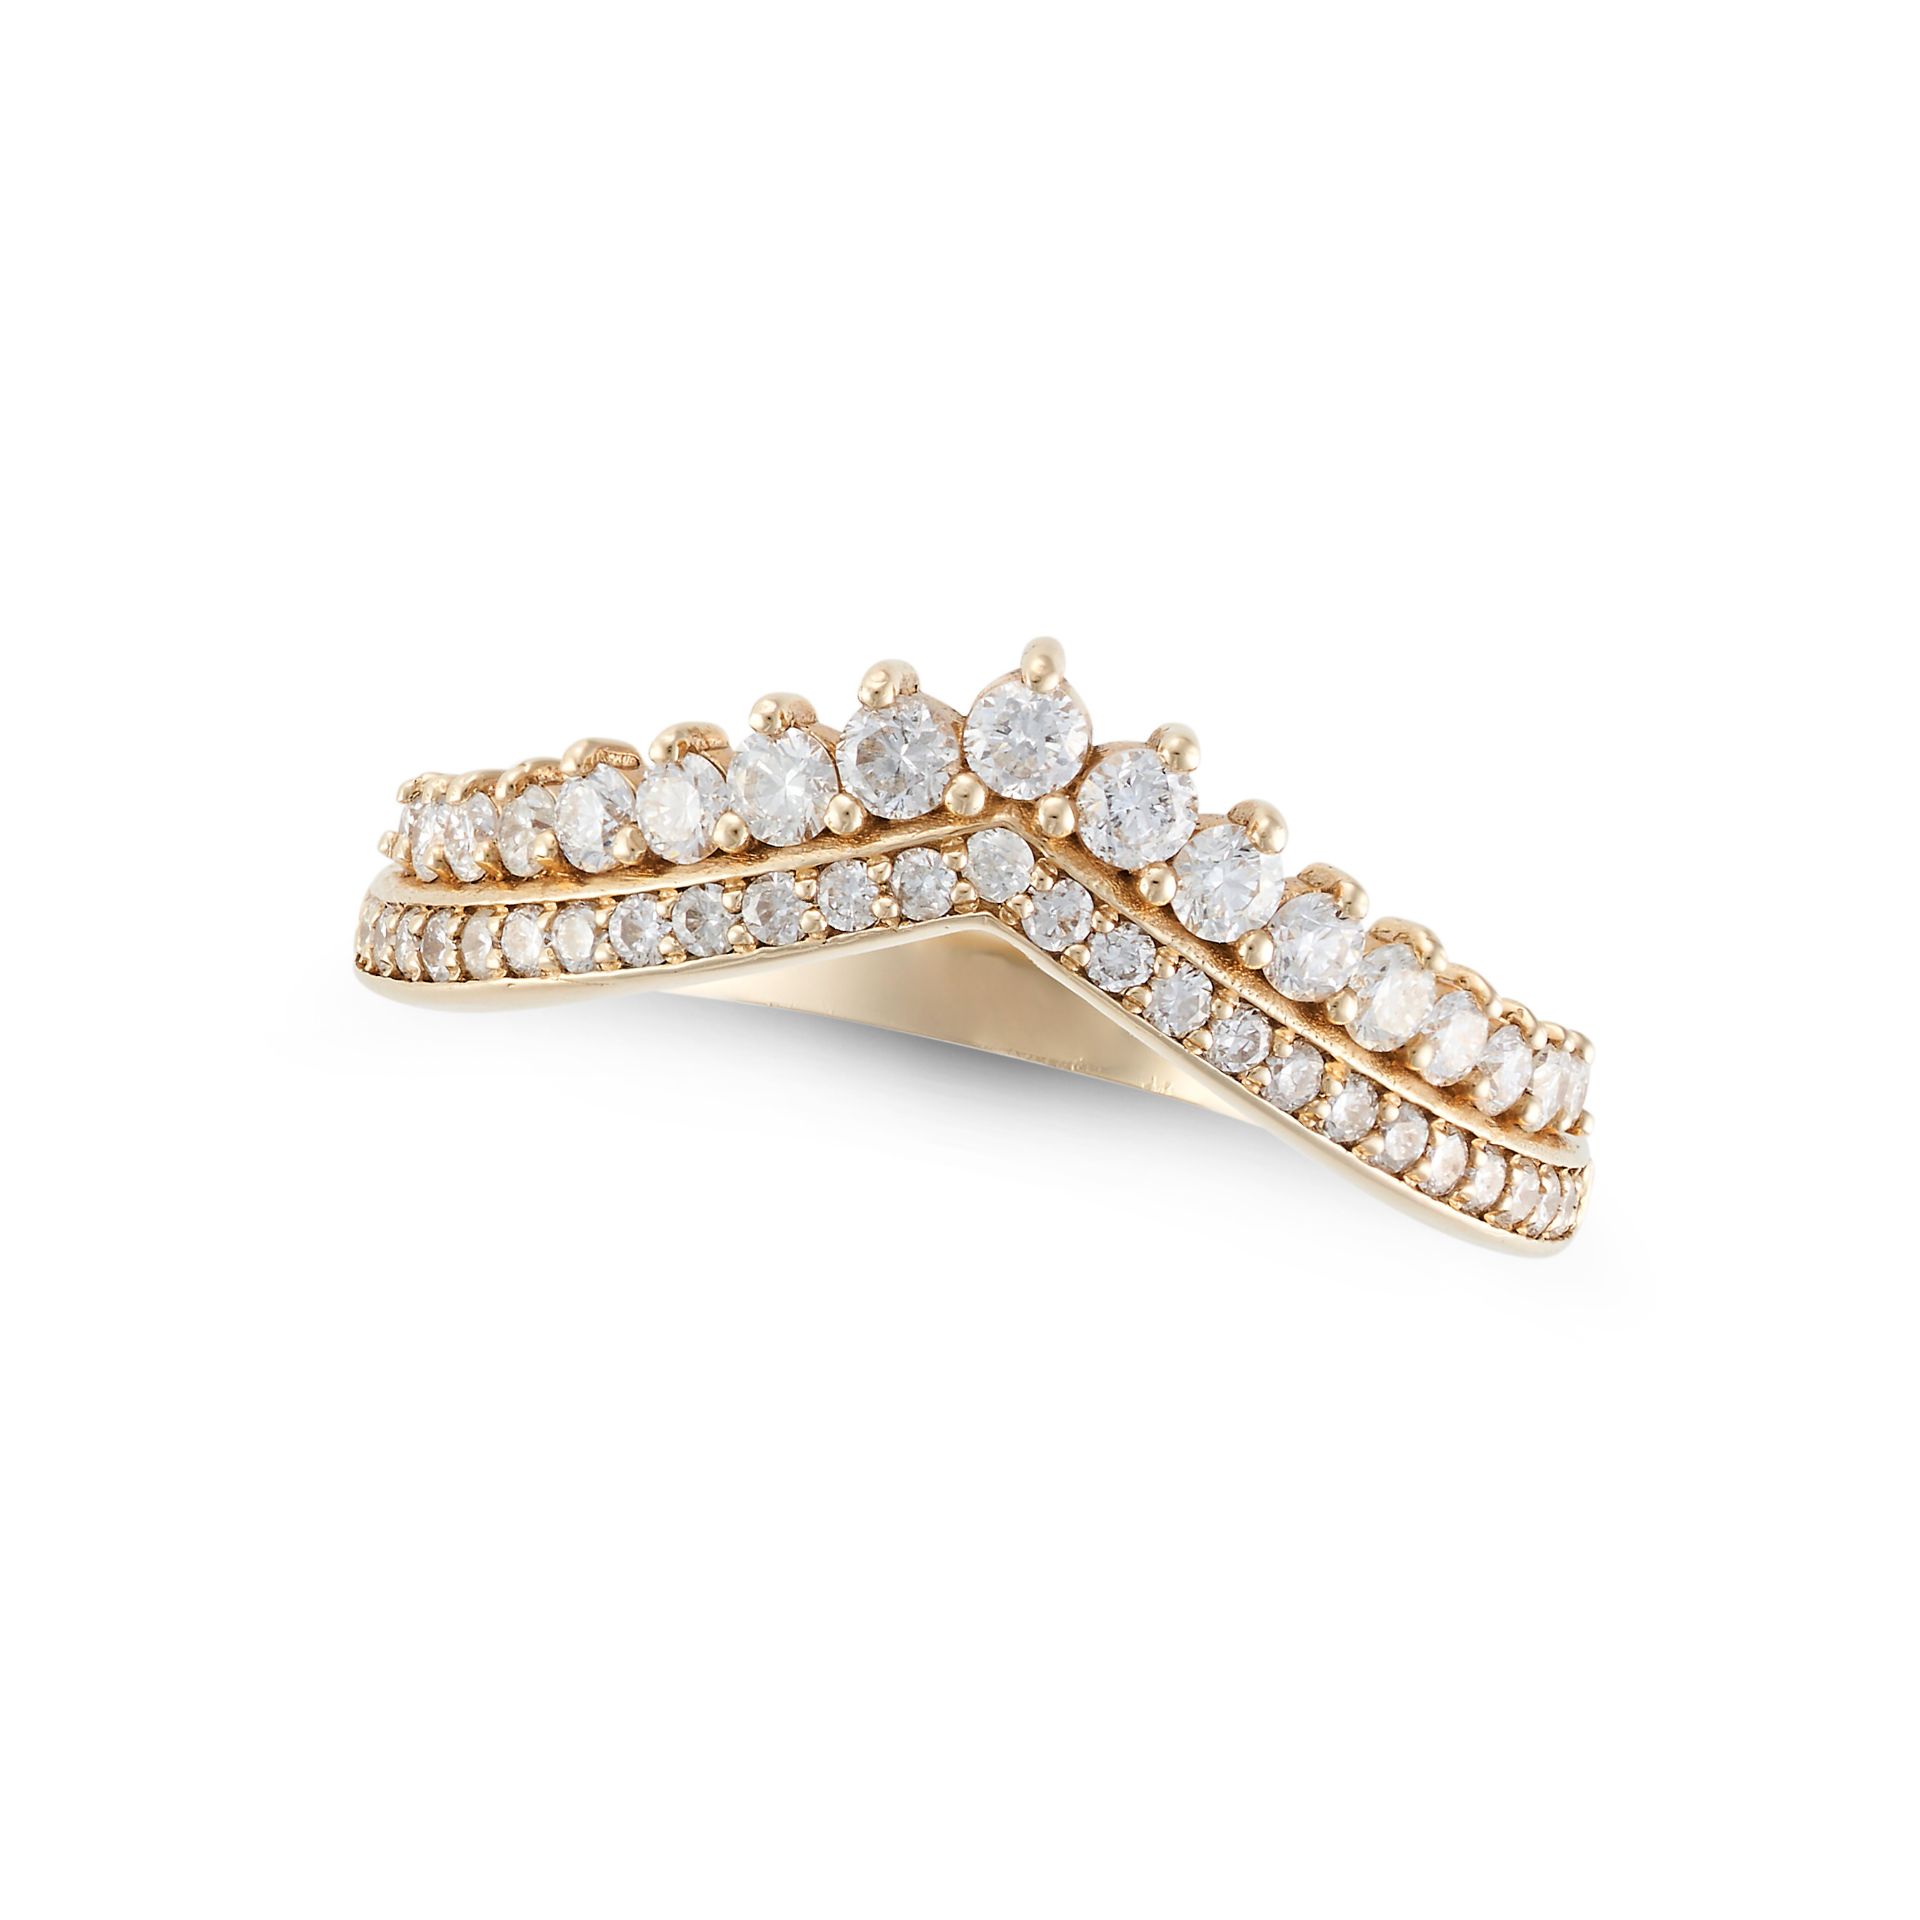 A DIAMOND WISHBONE RING set with two rows of round brilliant cut diamonds, inscribed 0.54ct, stam...